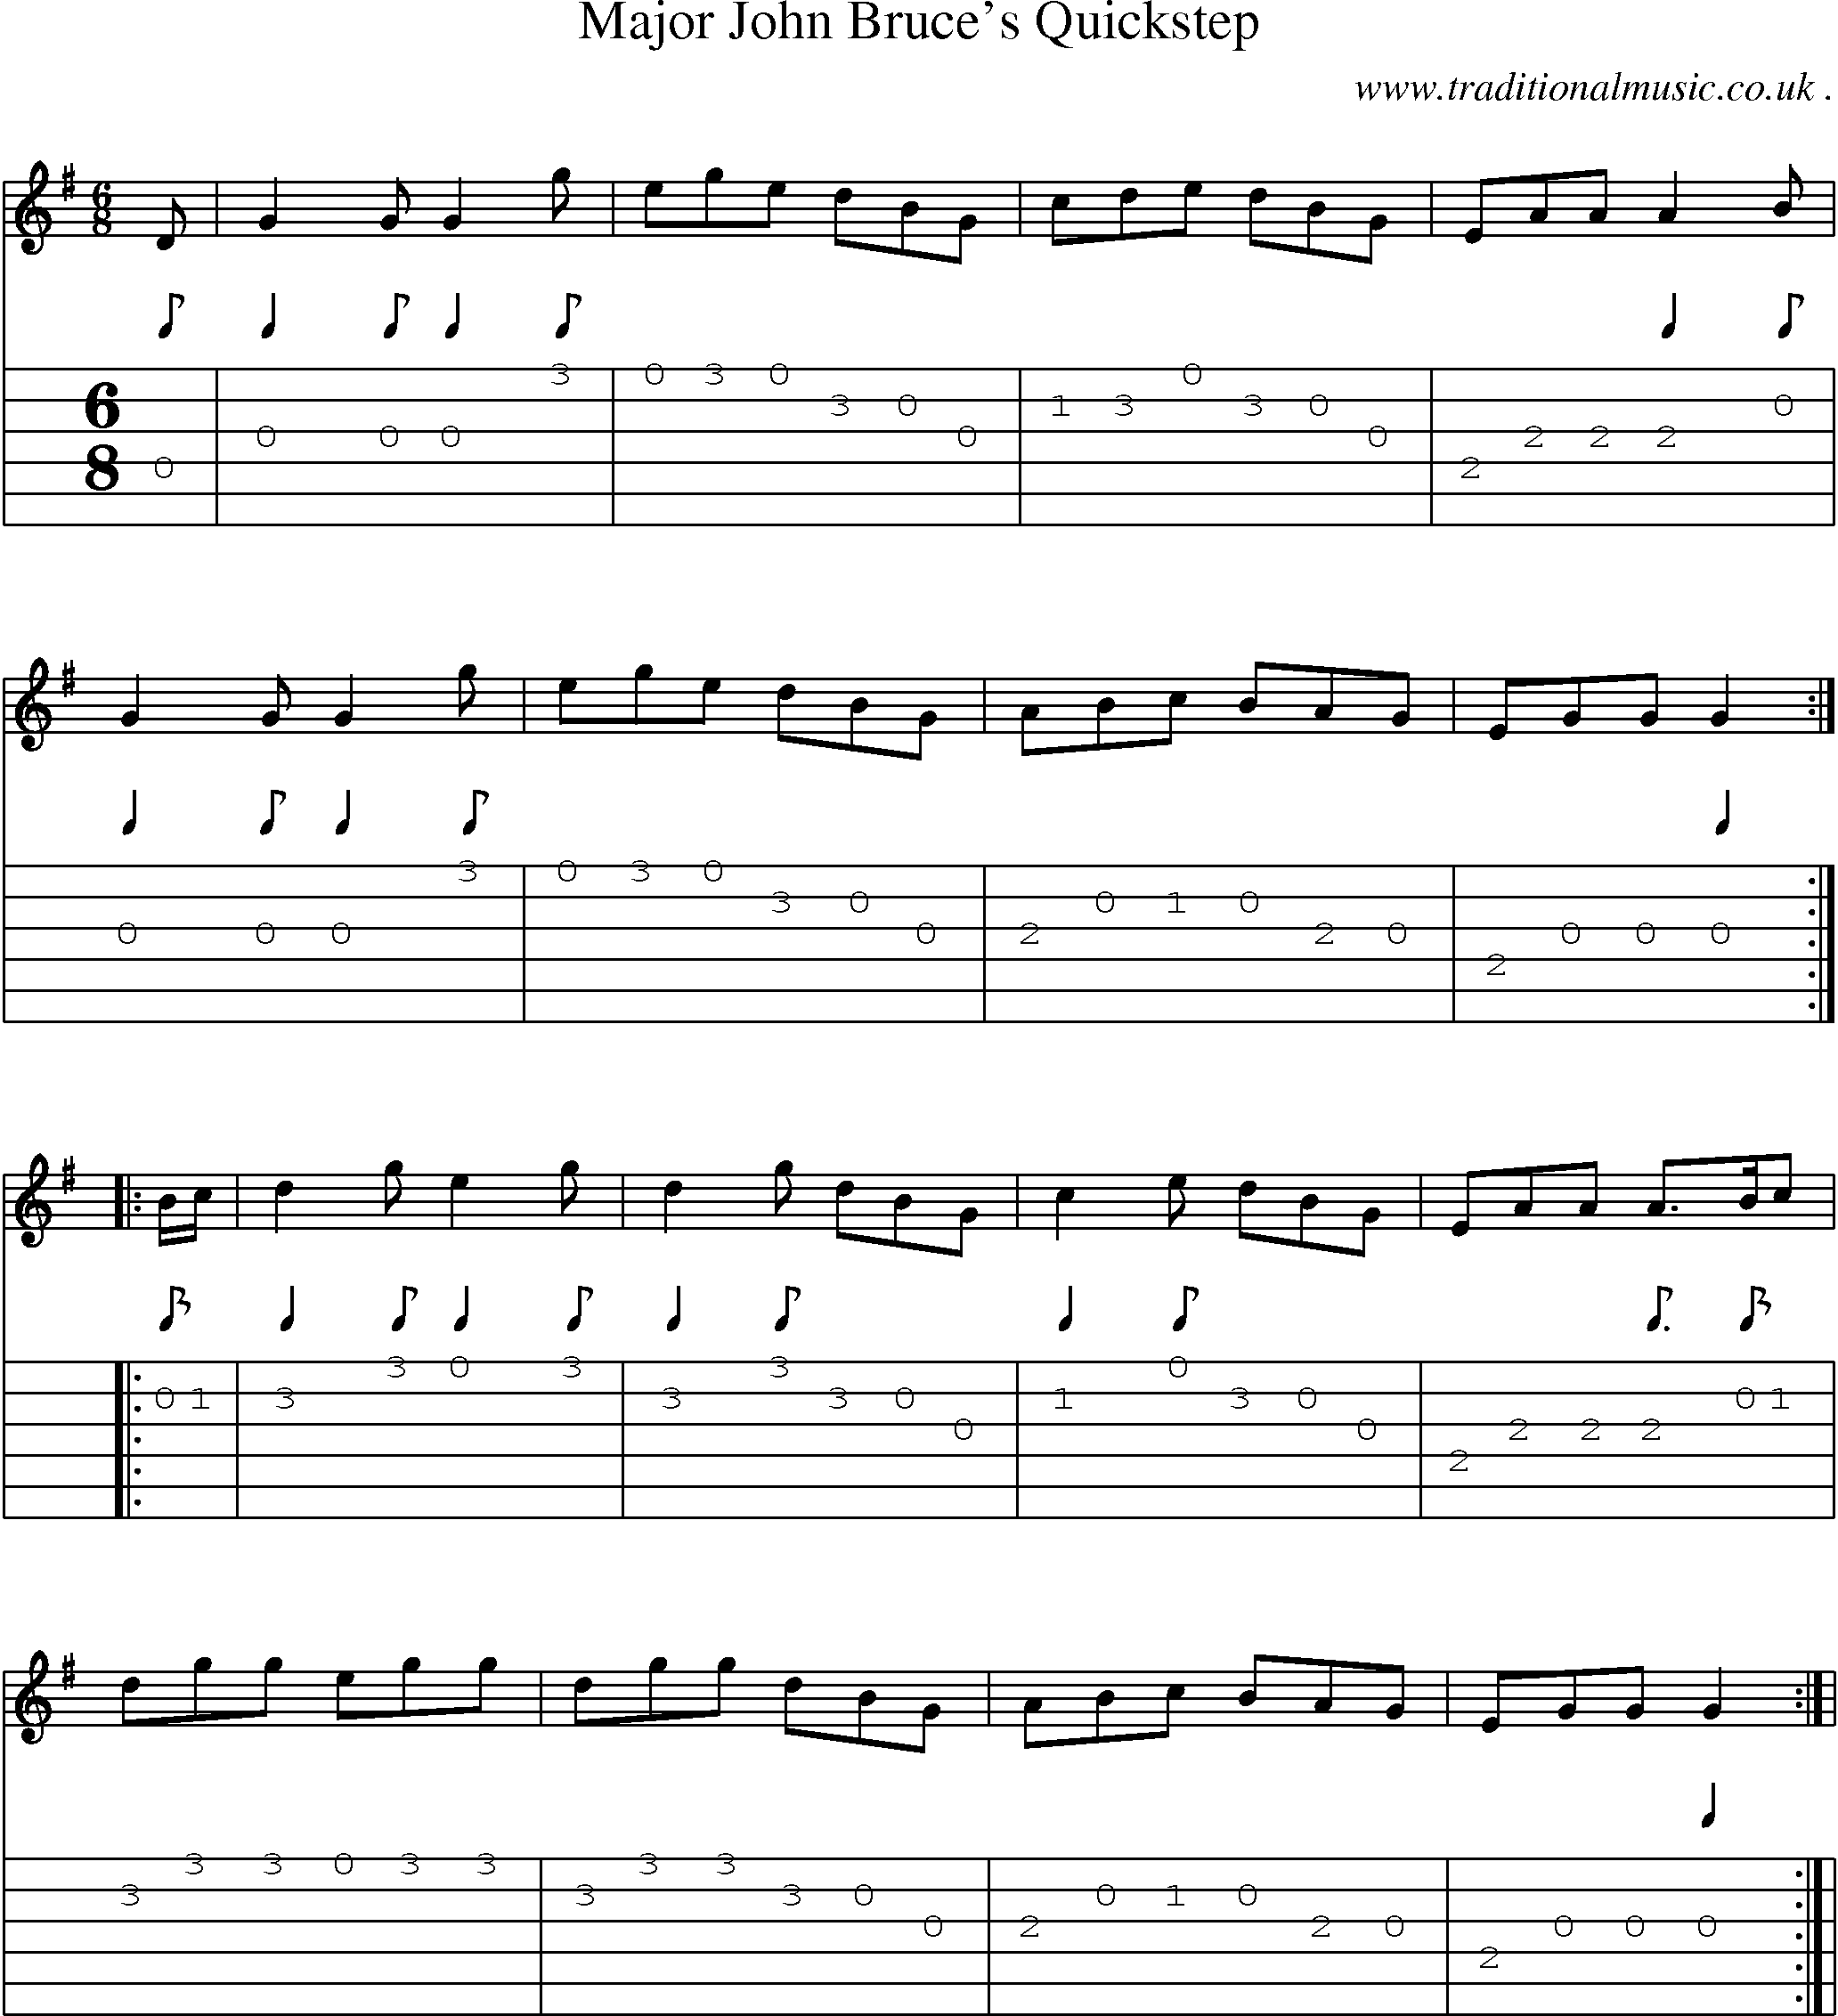 Sheet-Music and Guitar Tabs for Major John Bruces Quickstep